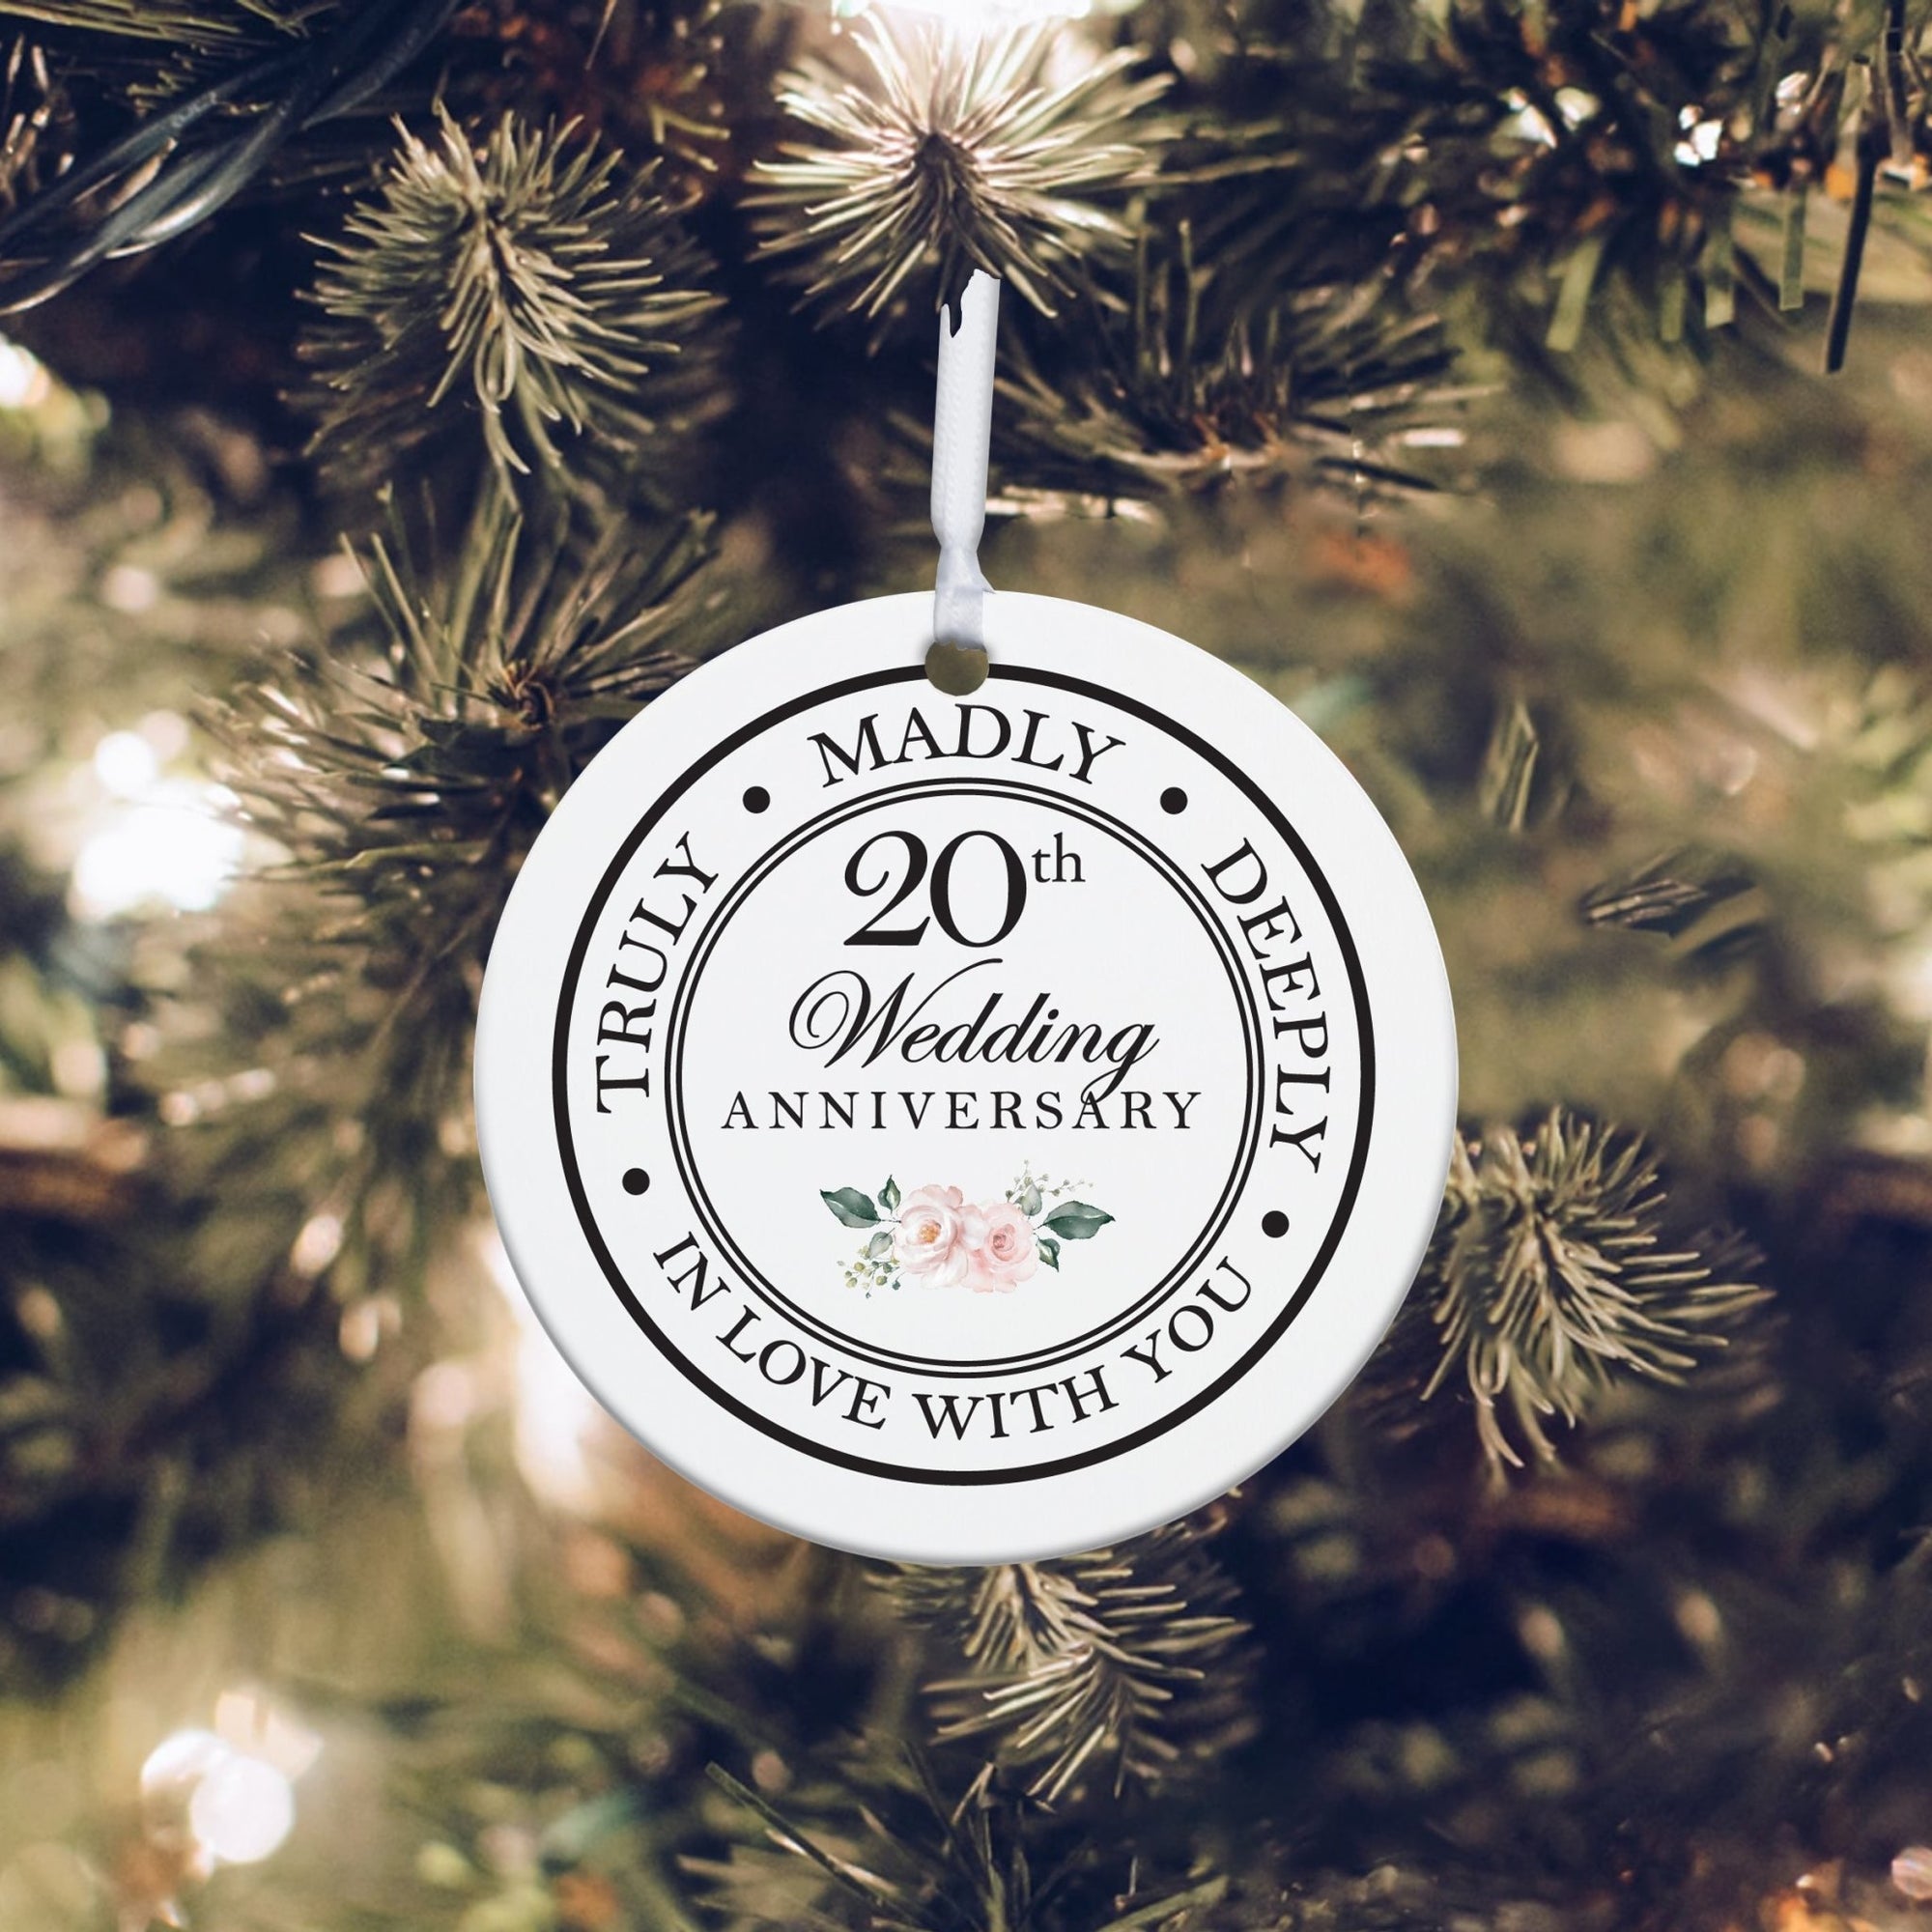 20th Wedding Anniversary White Ornament With Inspirational Message Gift Ideas - Truly, Madly, Deeply In Love With You - LifeSong Milestones